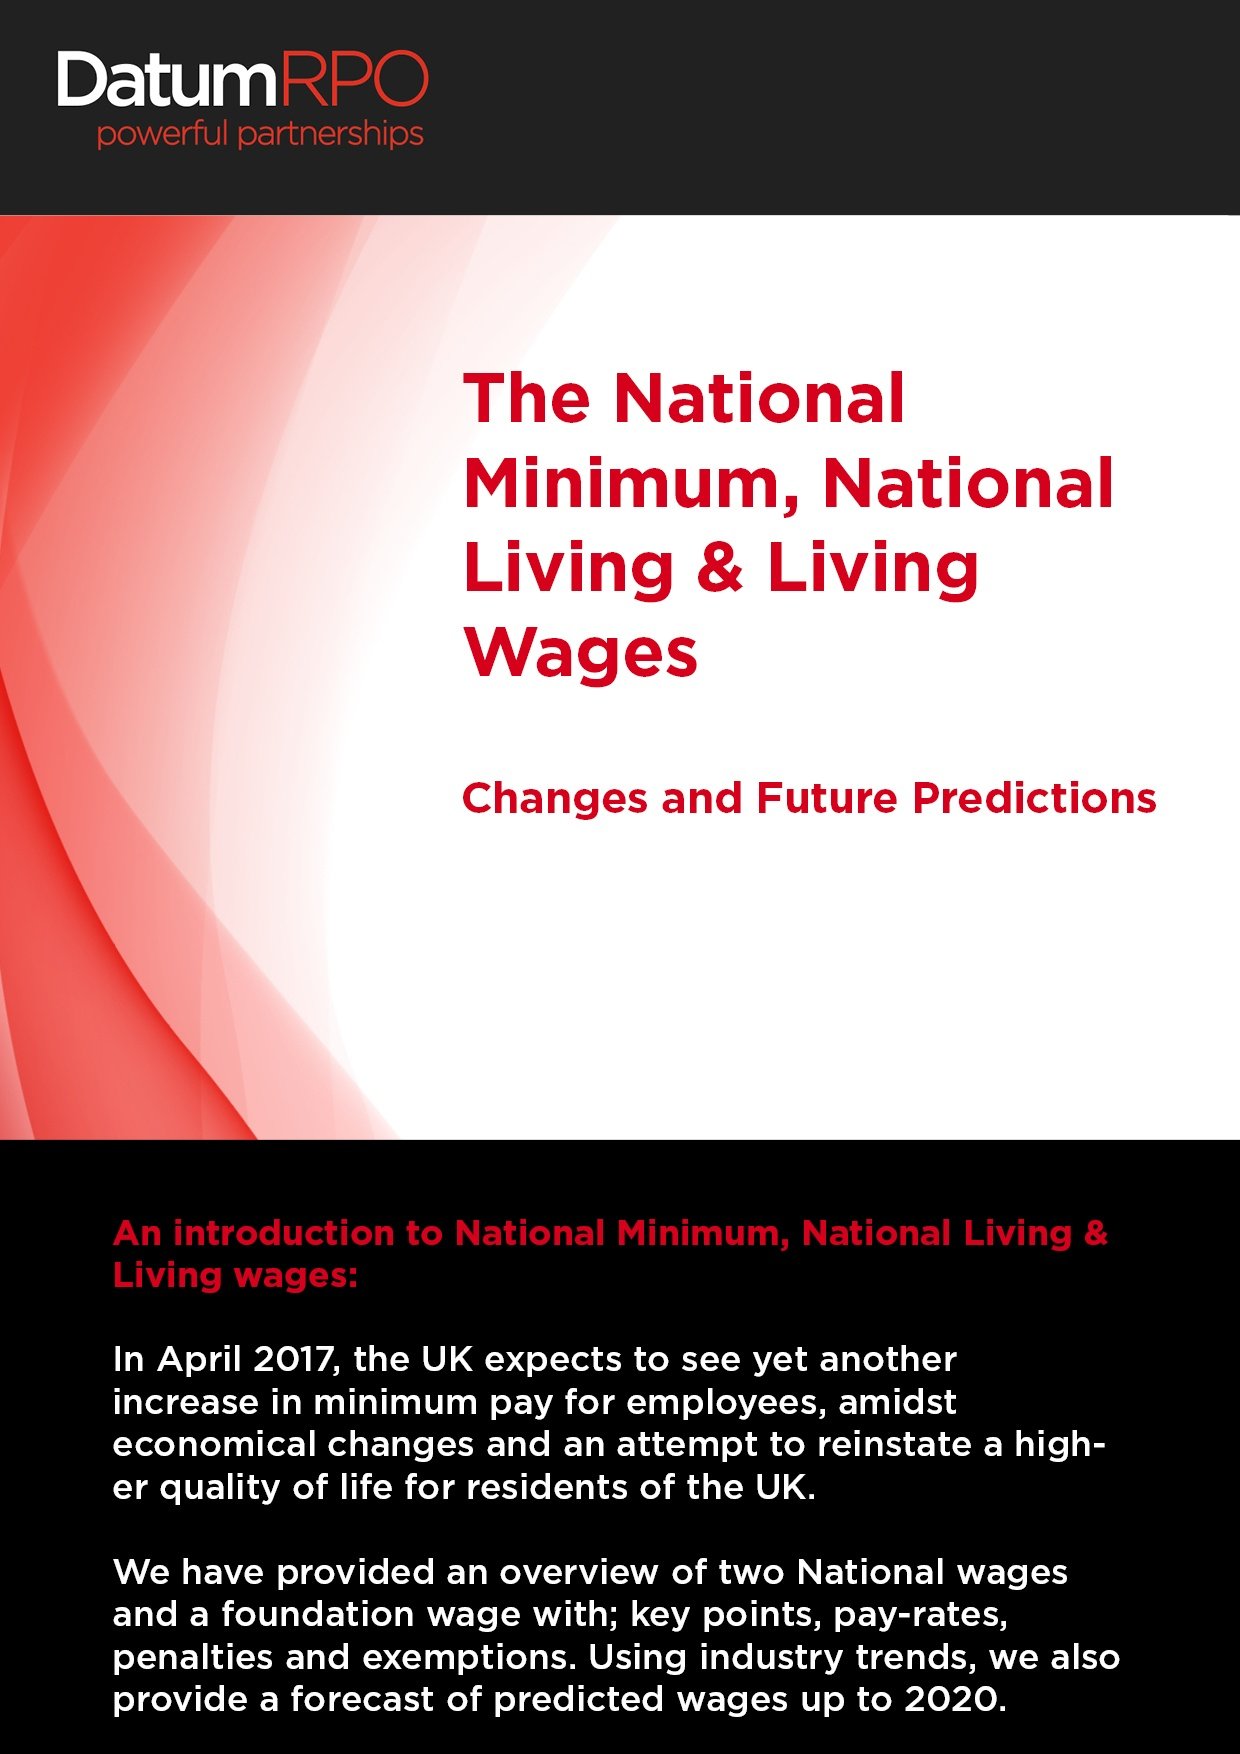 UK Wages, Changes and Future Predictions